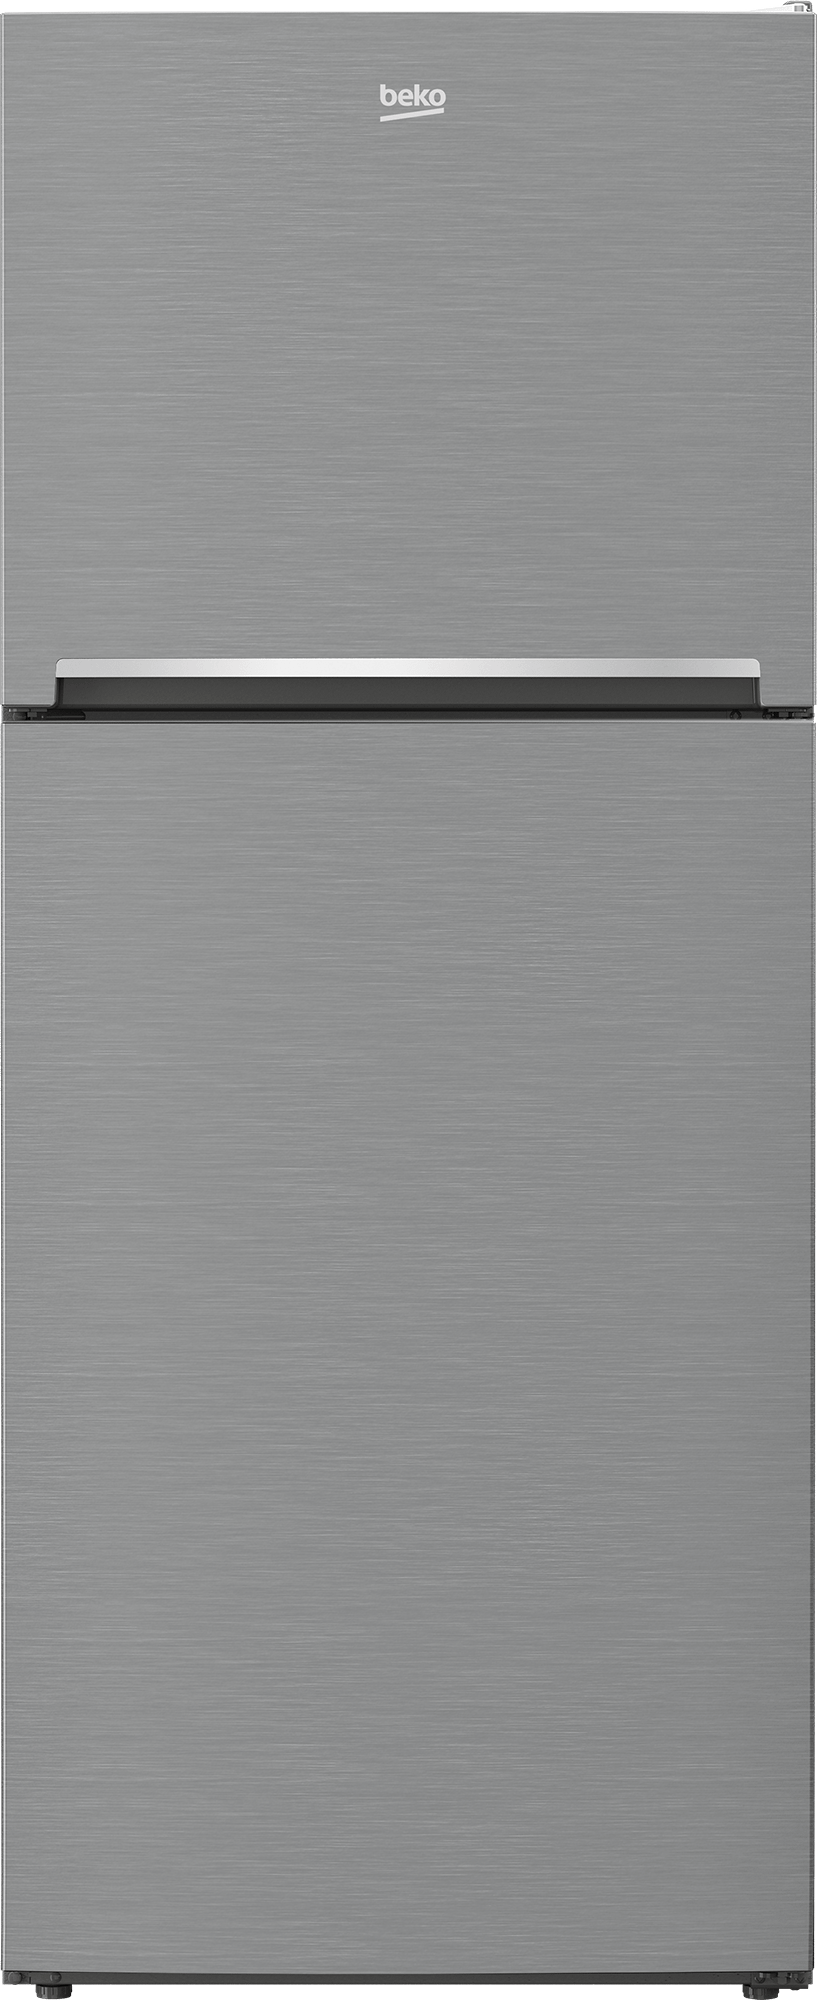 Beko 28" Freezer Top Stainless Steel Refrigerator with Auto Ice Maker and Everfresh